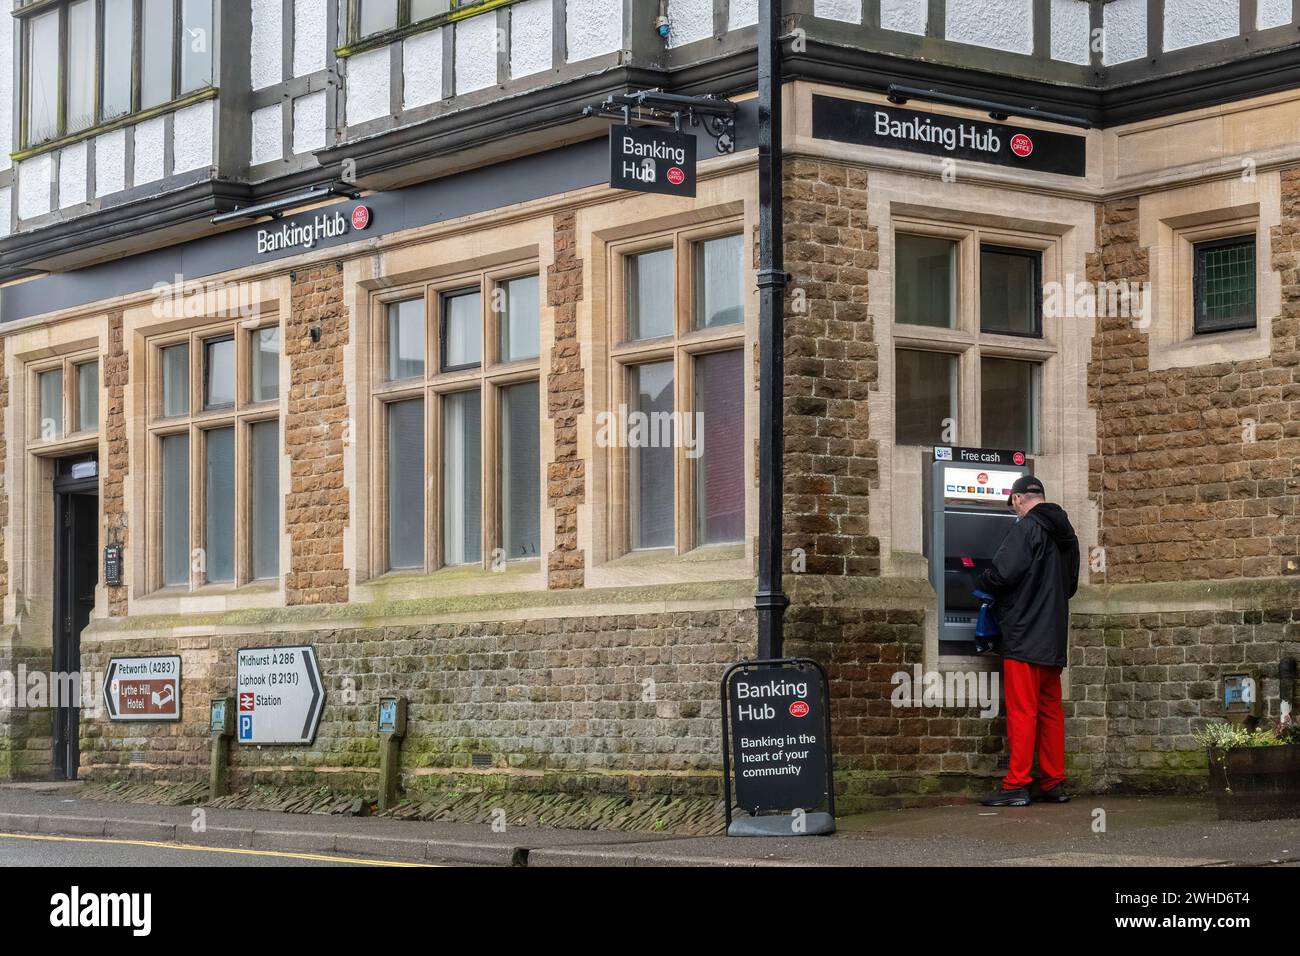 Banking hub run by post office in Haslemere town, Surrey, England, UK. Hubs are shared spaces on the high street serving customers of multiple banks. Stock Photo